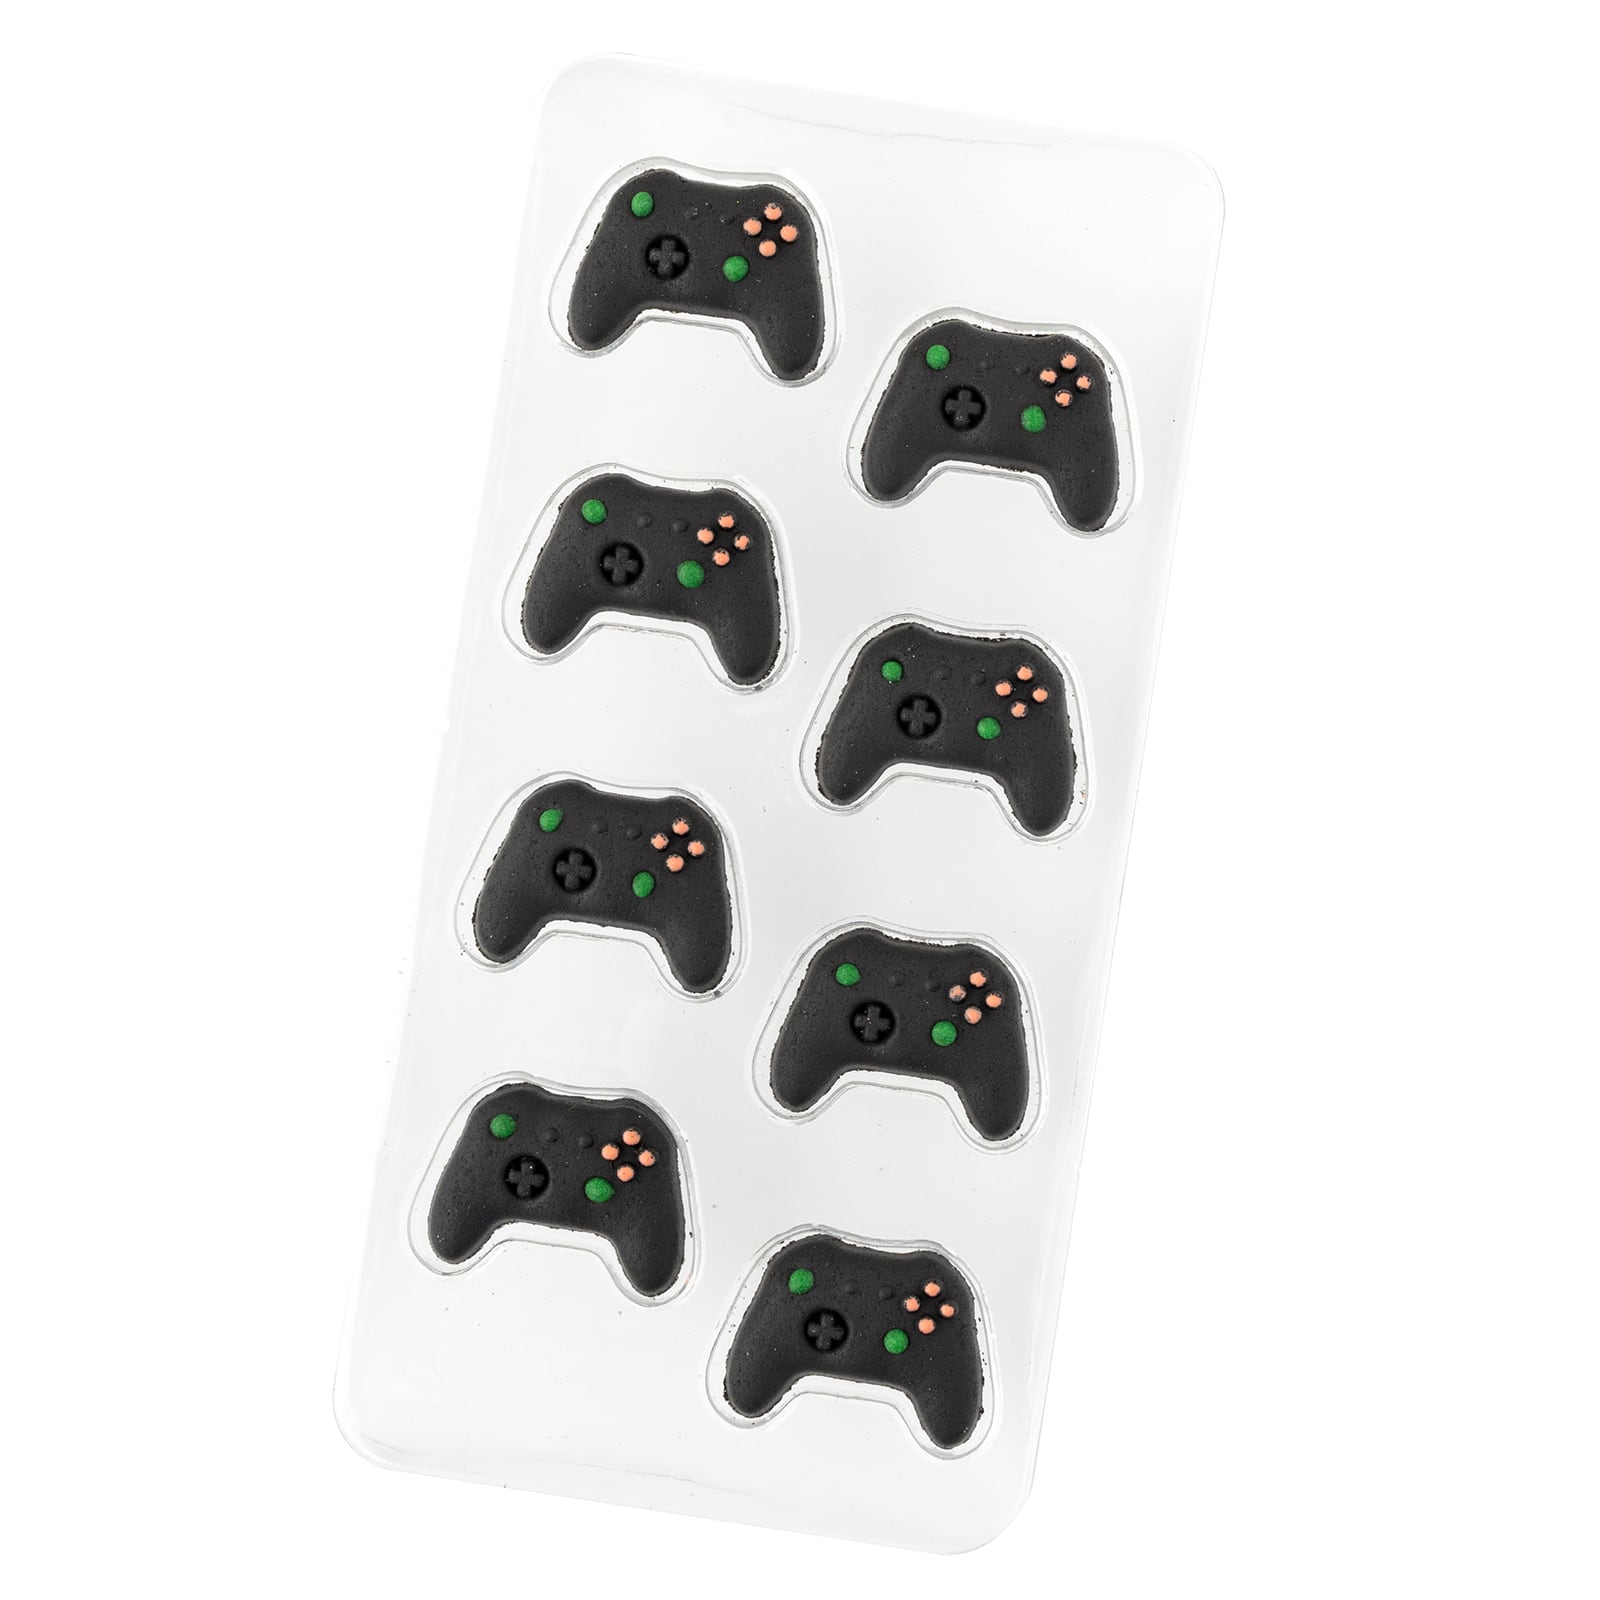 Sweet Tooth Fairy&#xAE; Gamer Icing Decorations, 8ct.